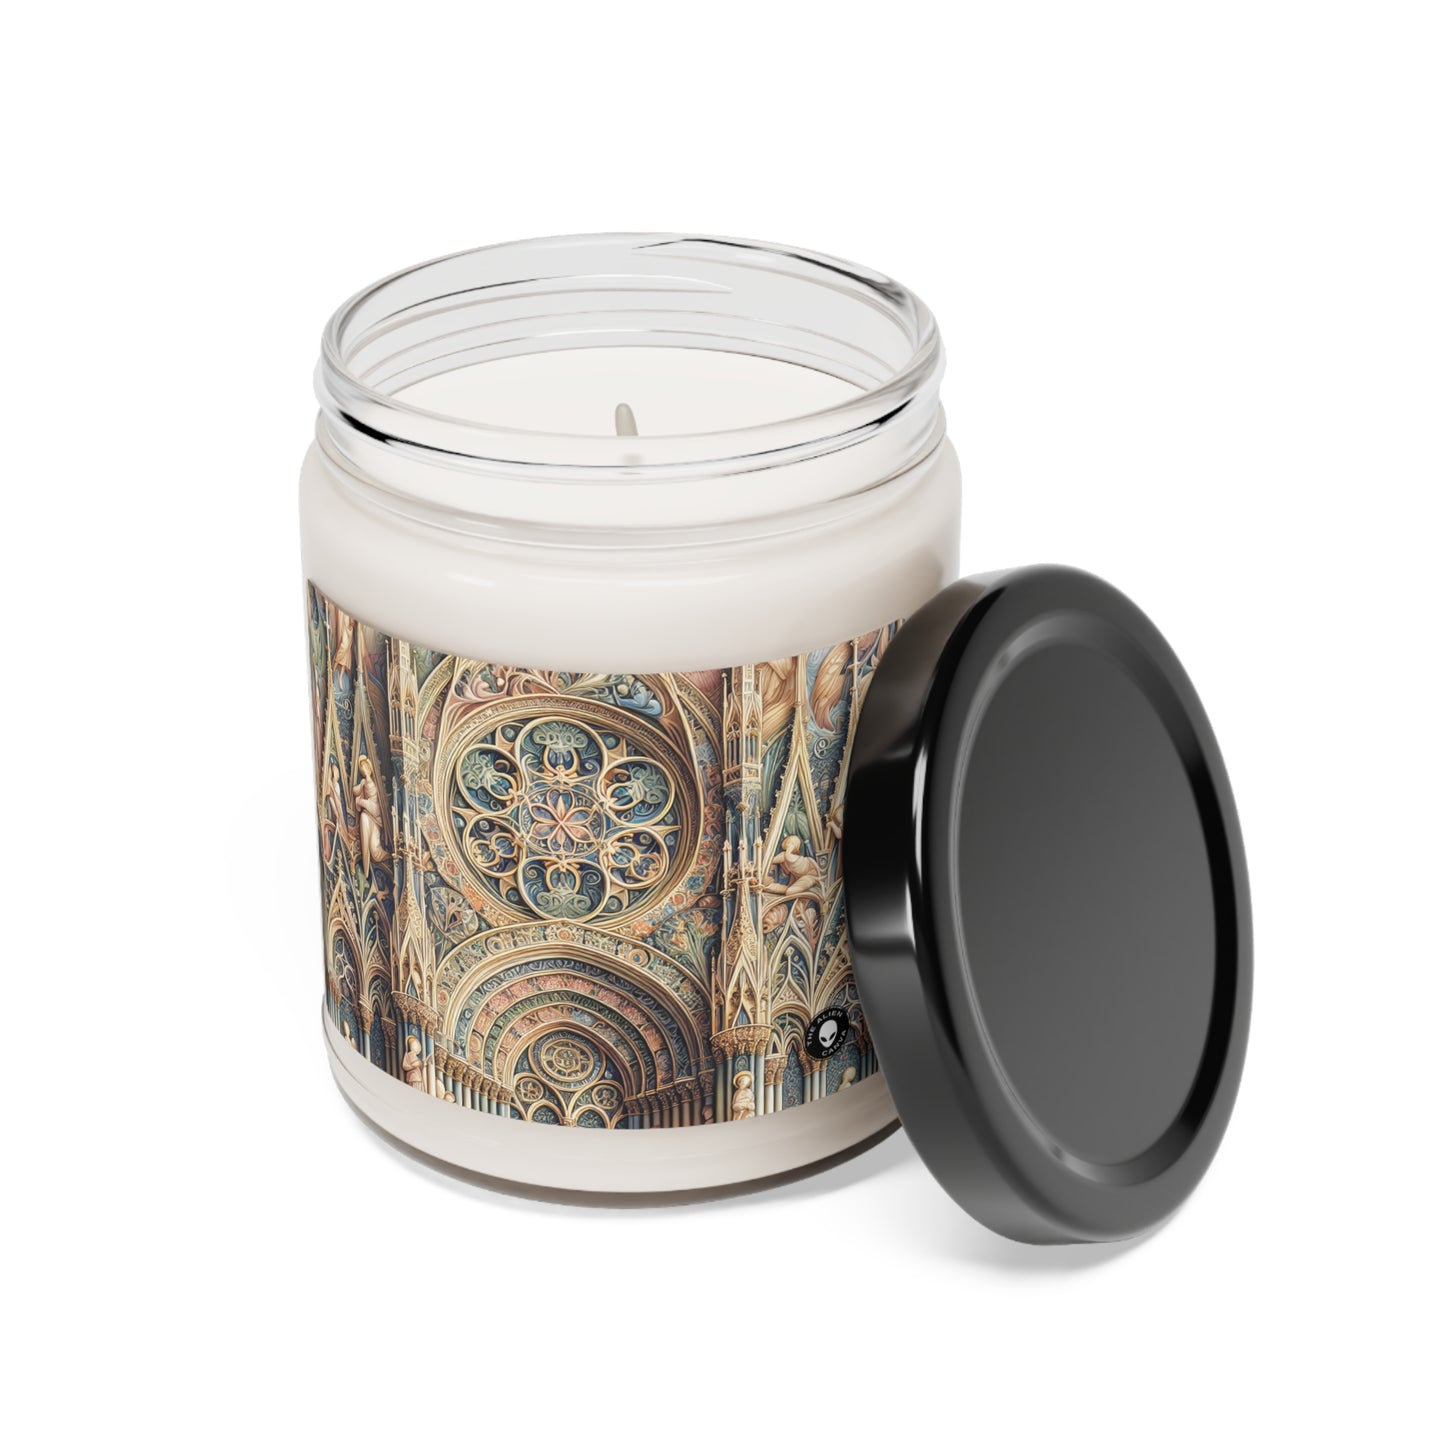 "Harmony of Angels: Celestial Serenade at Dusk" - The Alien Scented Soy Candle 9oz International Gothic